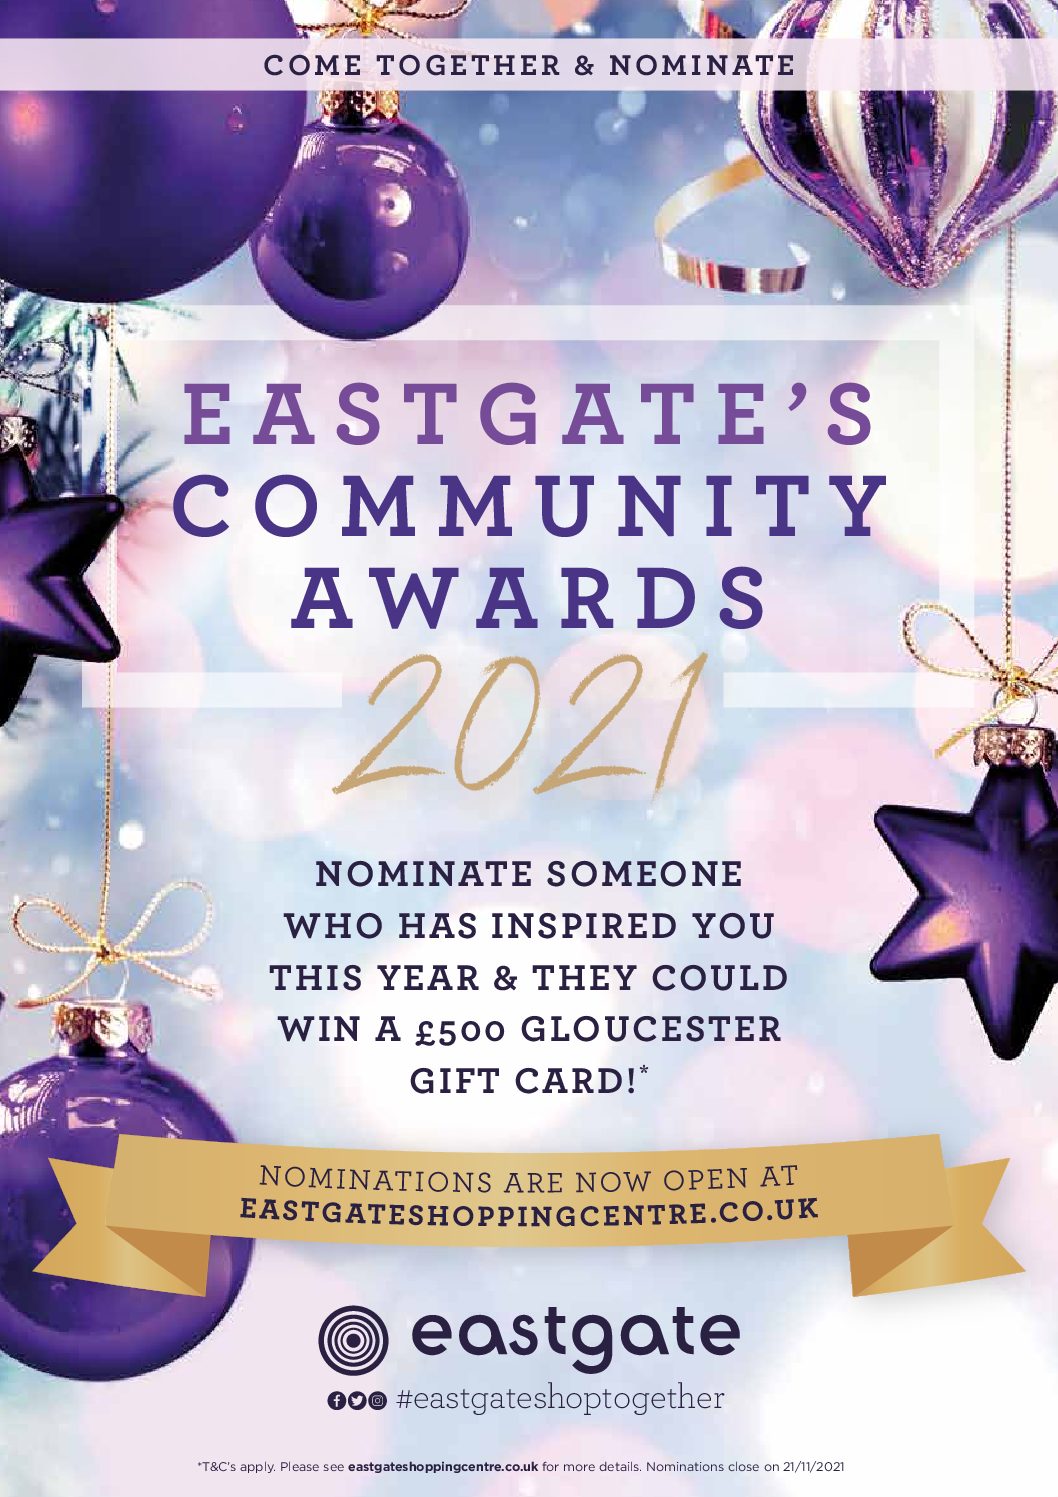 Can you think of someone who deserves to win a £500 community award?